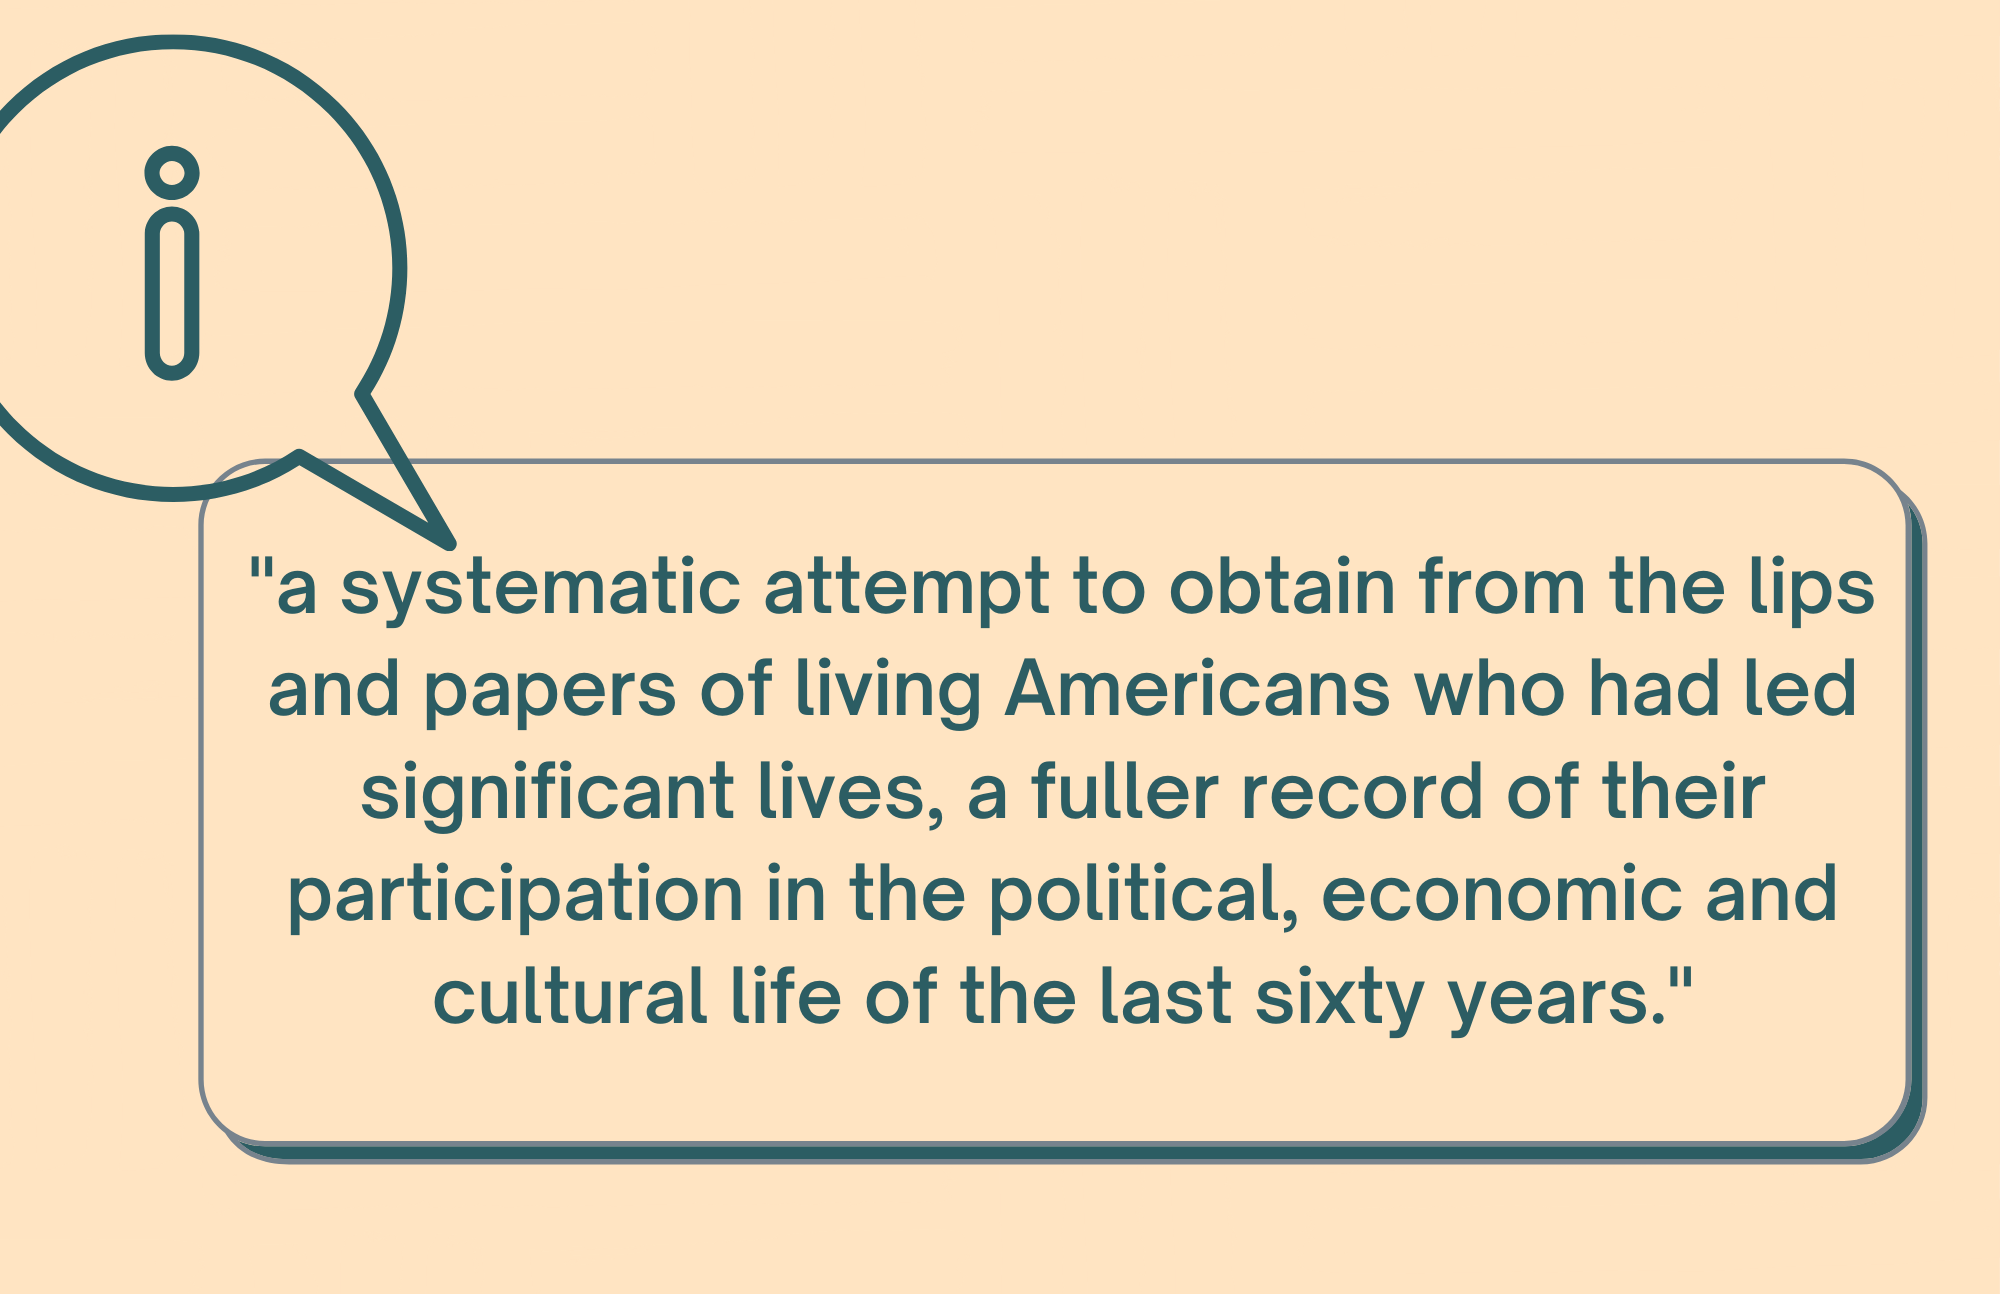 [quote card] "a systematic attempt to obtain from the lips and papers of living Americans who had led significant lives, a fuller record of their participation in the political, economic and cultural life of the last sixty years."